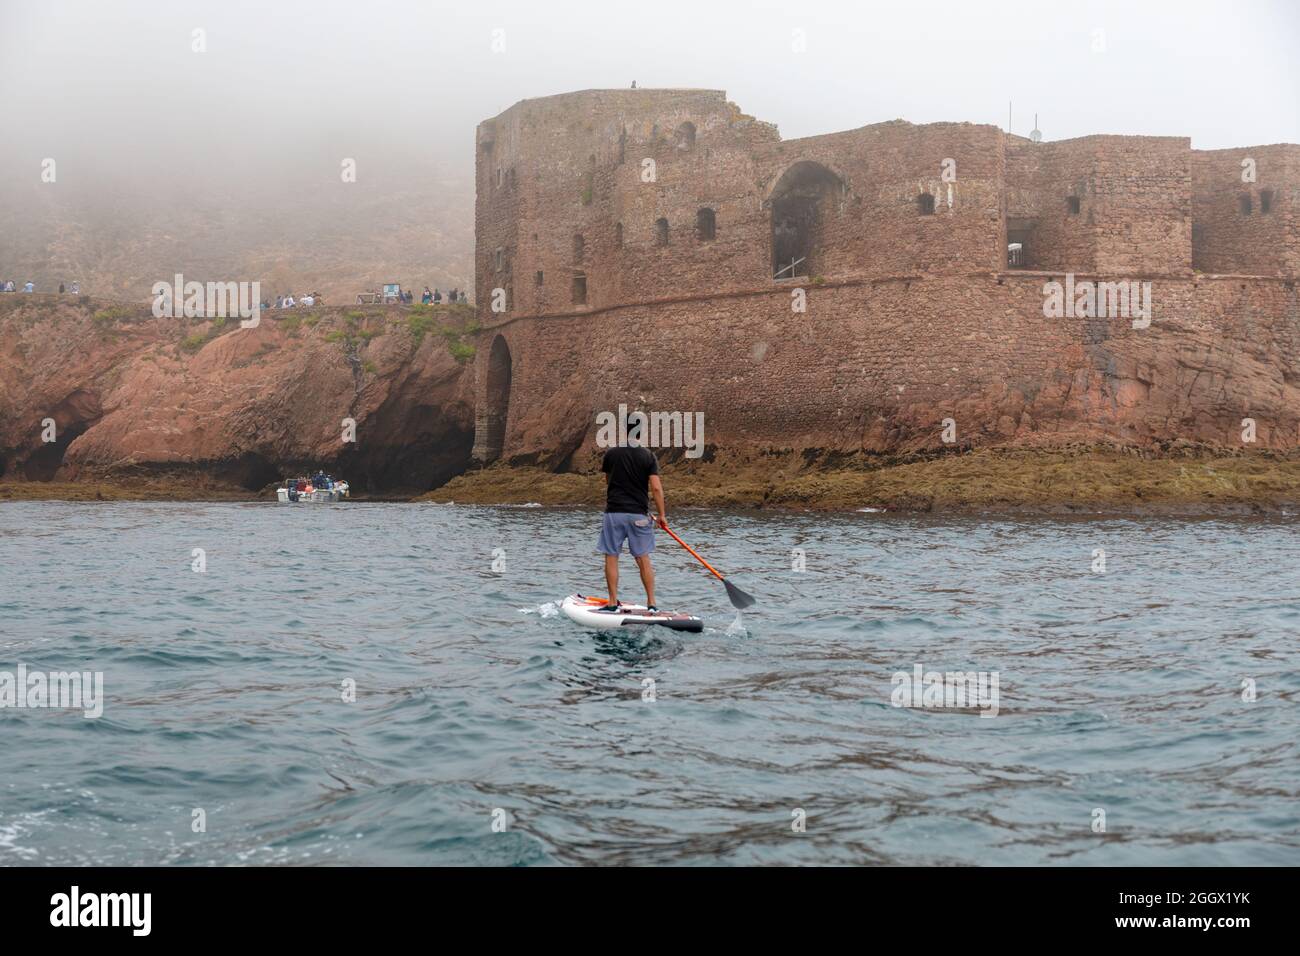 Man on paddle board in Berlenga Grande island, the largest island in the Berlengas archipelago, off the coast of Peniche, Portugal. Stock Photo